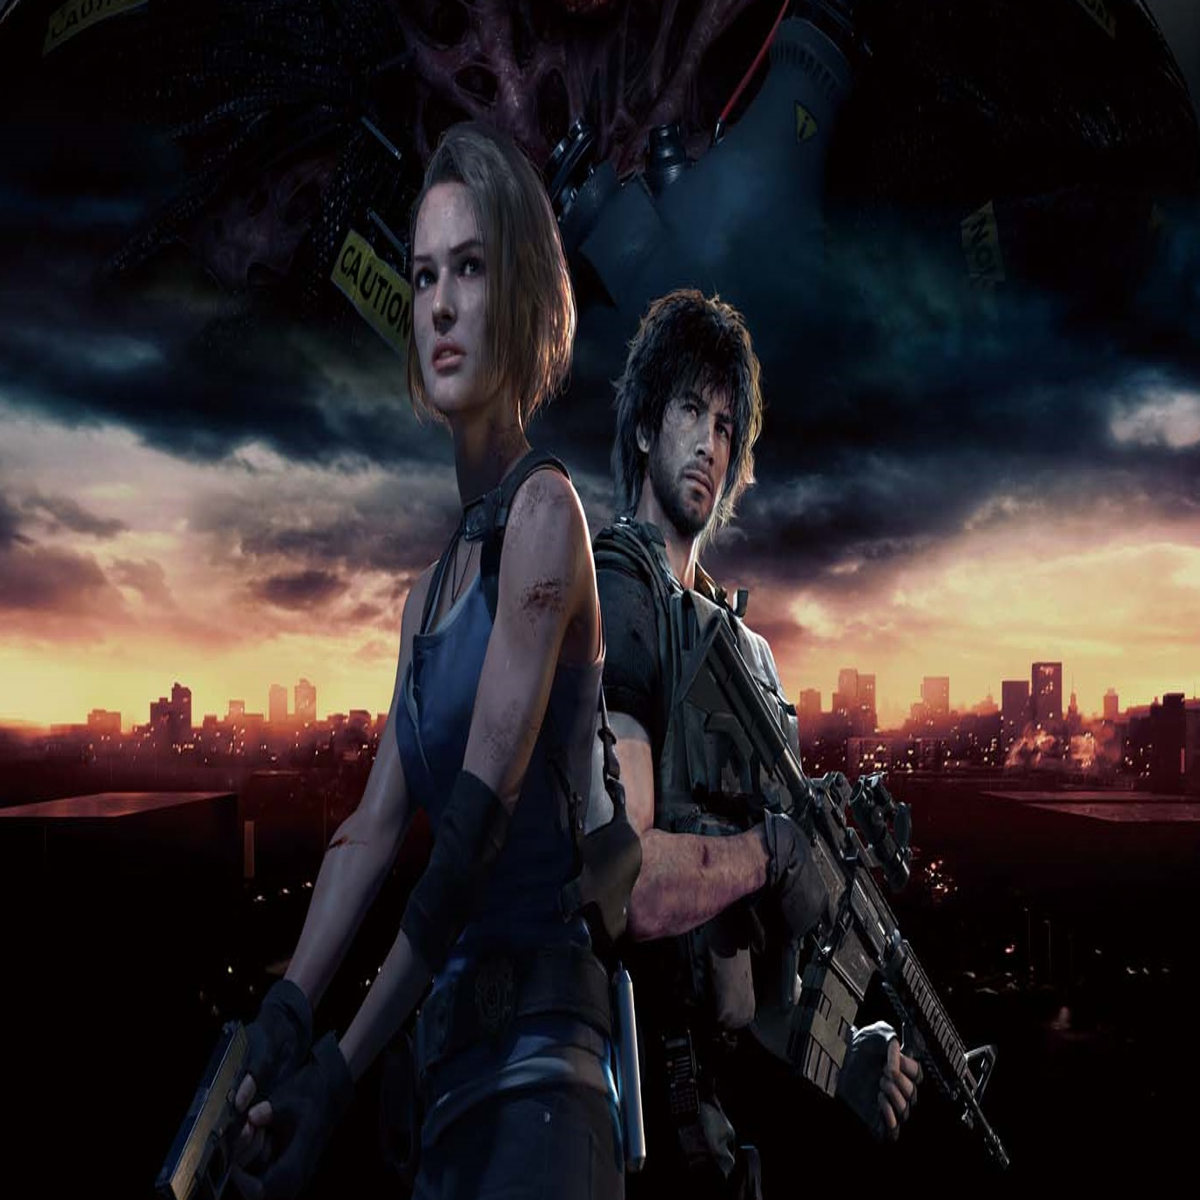 Resident Evil: Resistance is not actually canon, confirms Capcom